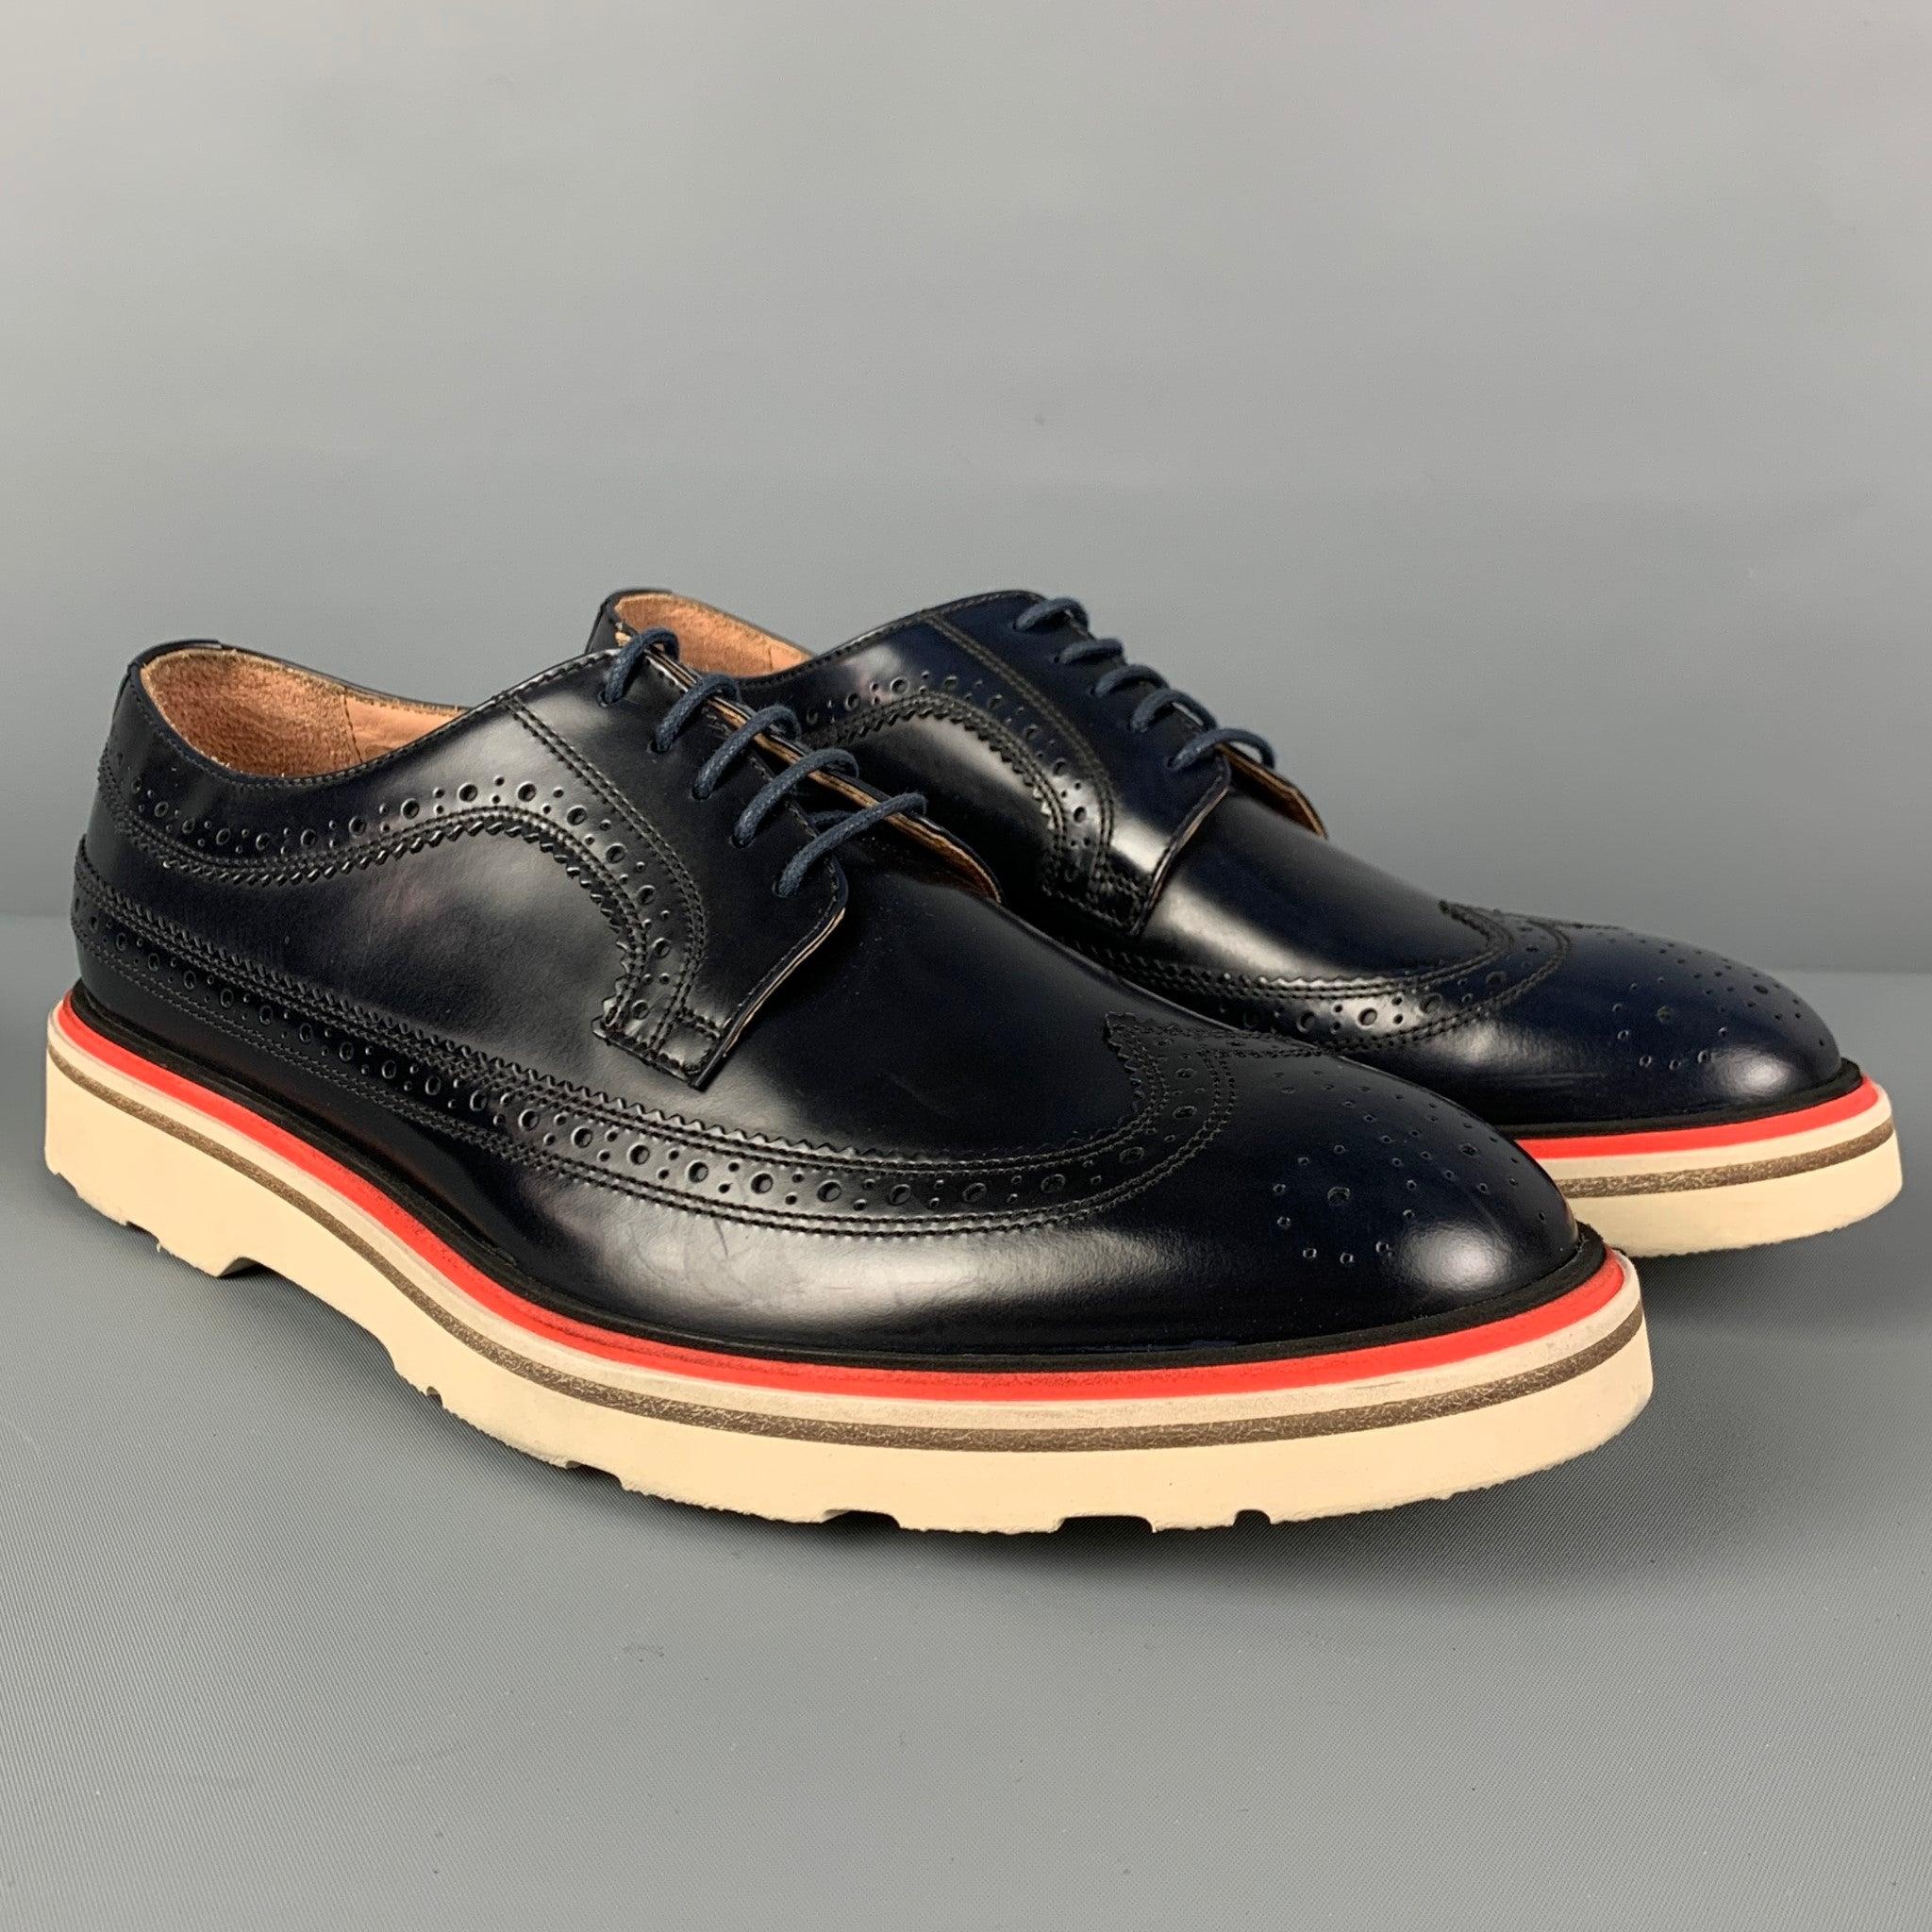 PAUL SMITH shoes comes in a navy & white perforated leather featuring a wingtip style and a lace up closure. Comes with boX. Made in Italy. Very Good
Pre-Owned Condition. 

Marked:   6.5Outsole:11.5 inches  x 4.5 inches 
  
  
 
Reference: